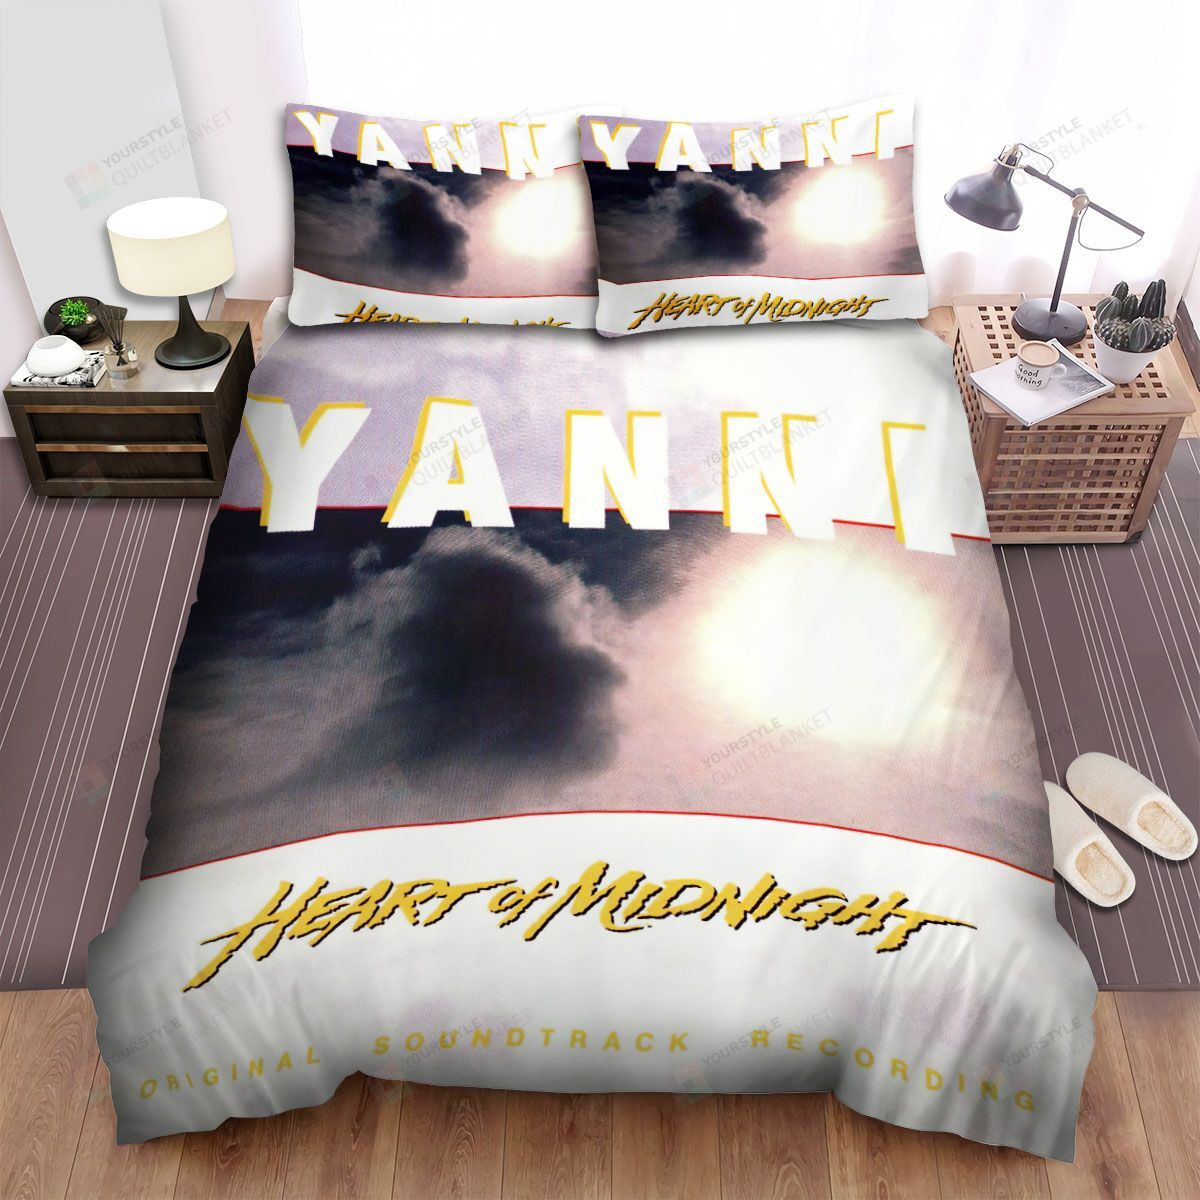 Yanni Heart Of Midnight Album Cover Bed Sheets Spread Comforter Duvet Cover Bedding Sets